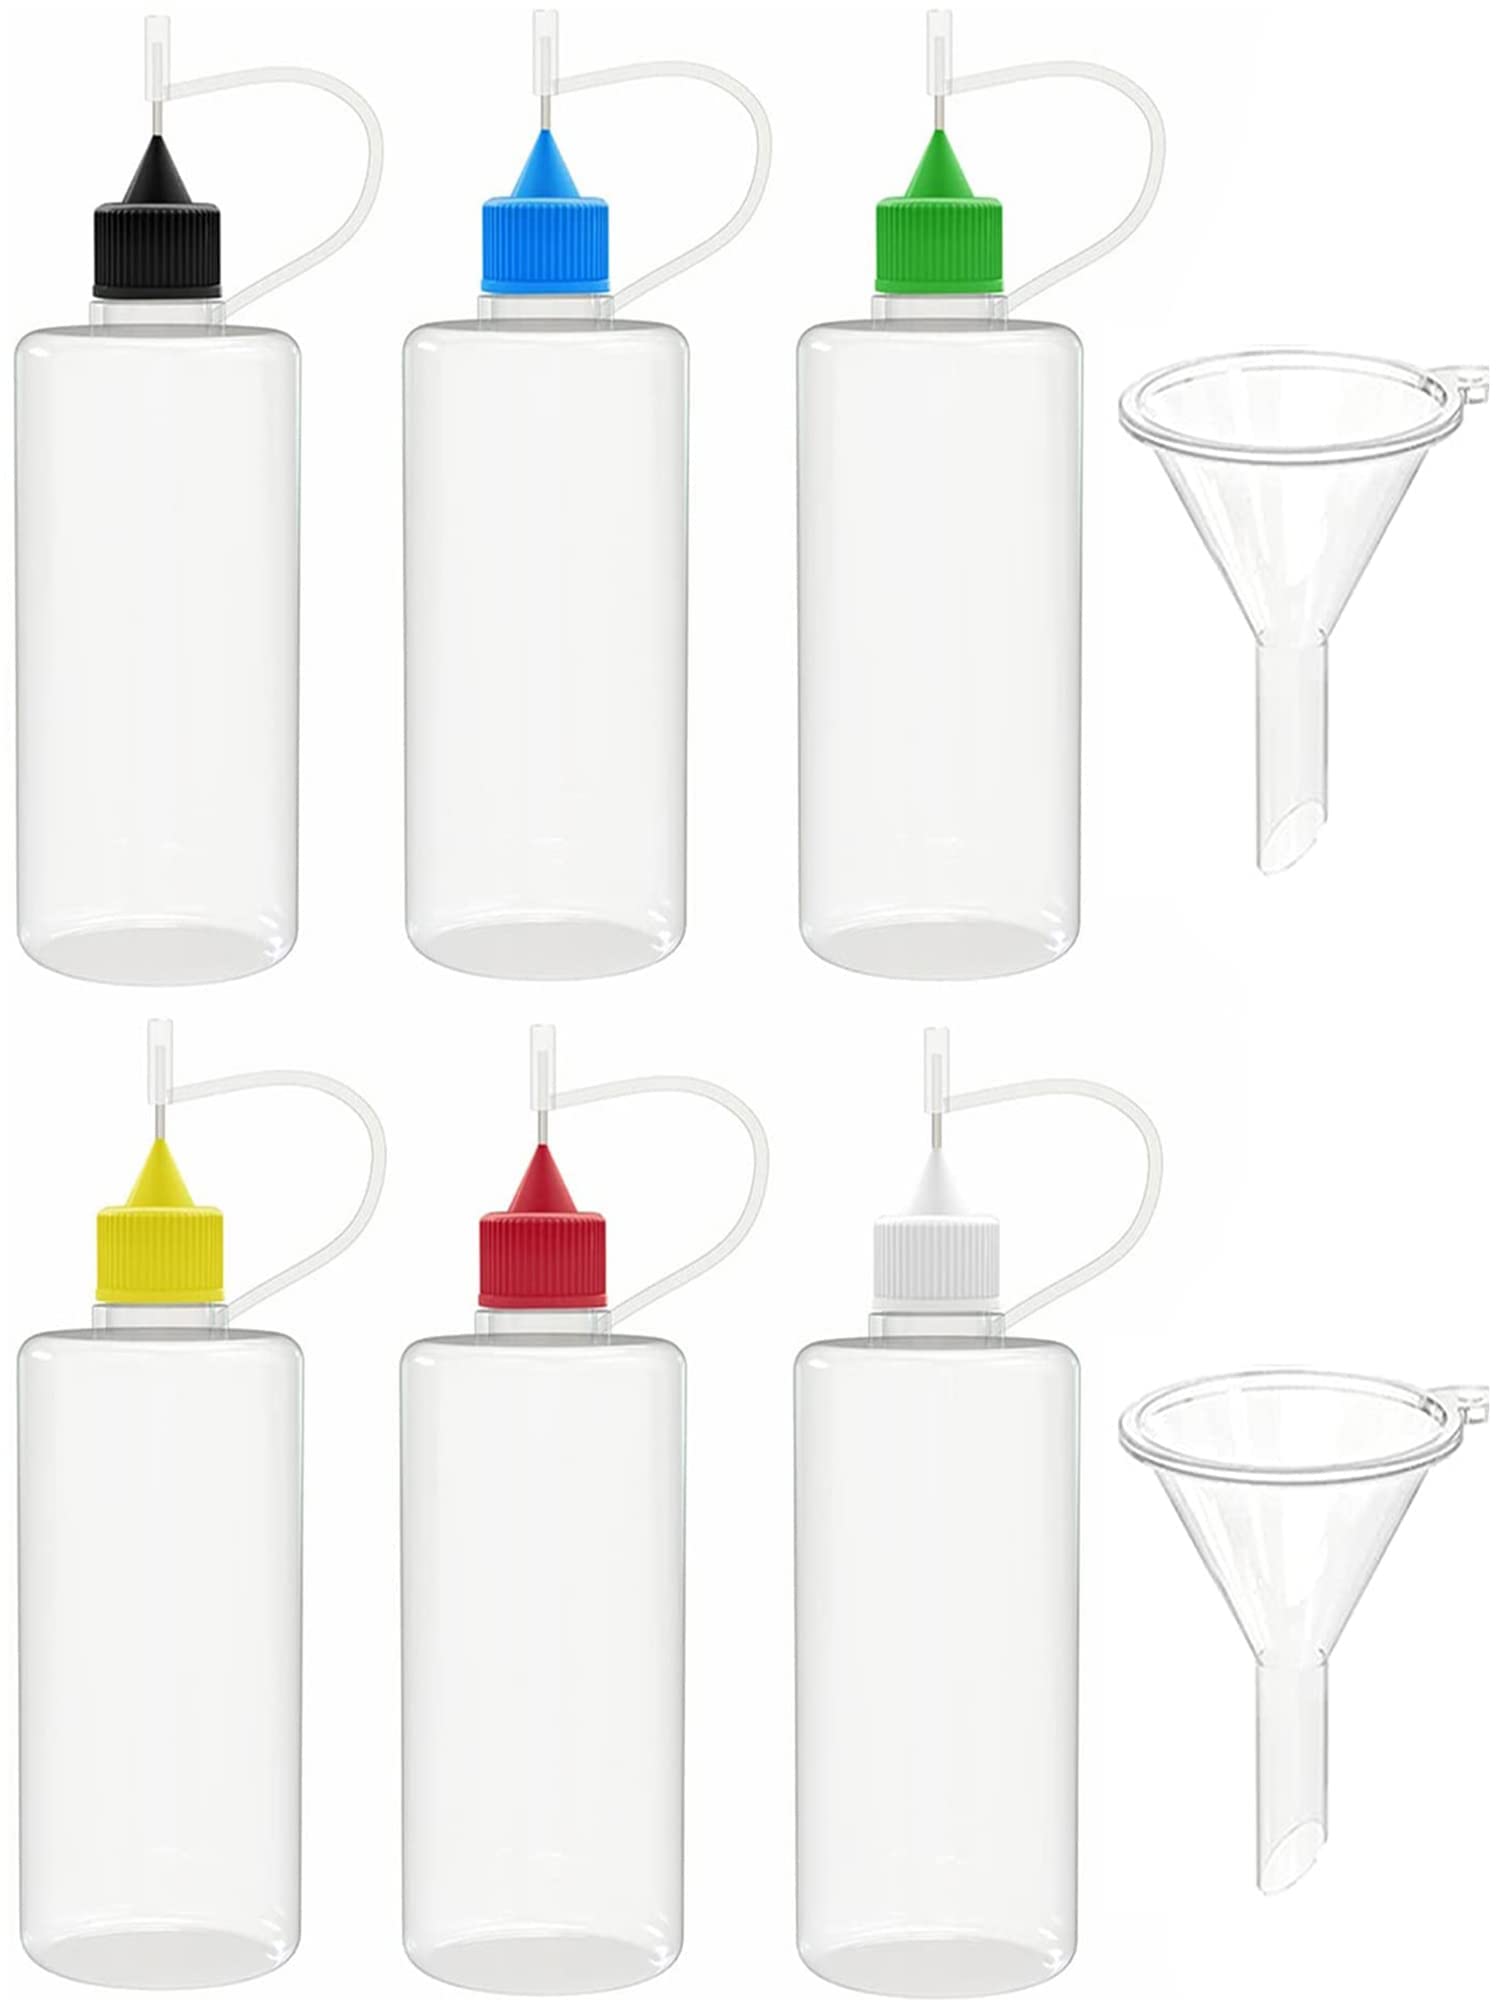 Jigitz 15pk Precision Tip Applicator Bottles with Funnels for Paint and Glue, Size: Small